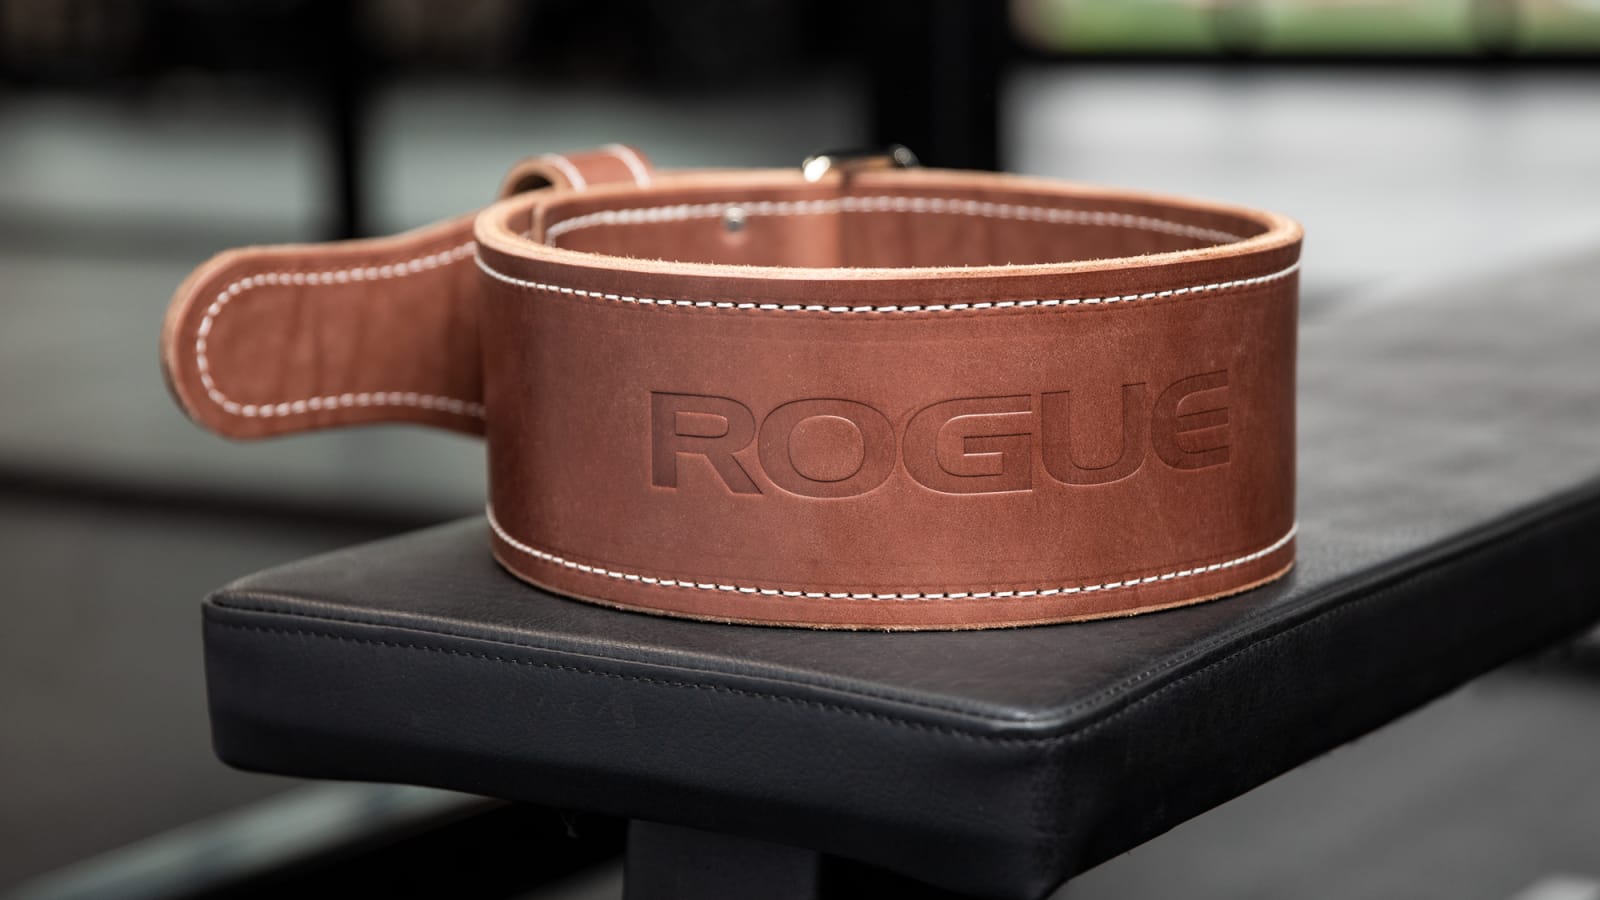 Rogue Leather Belt - Handmade High-Quality Leather Belt, Made in the USA